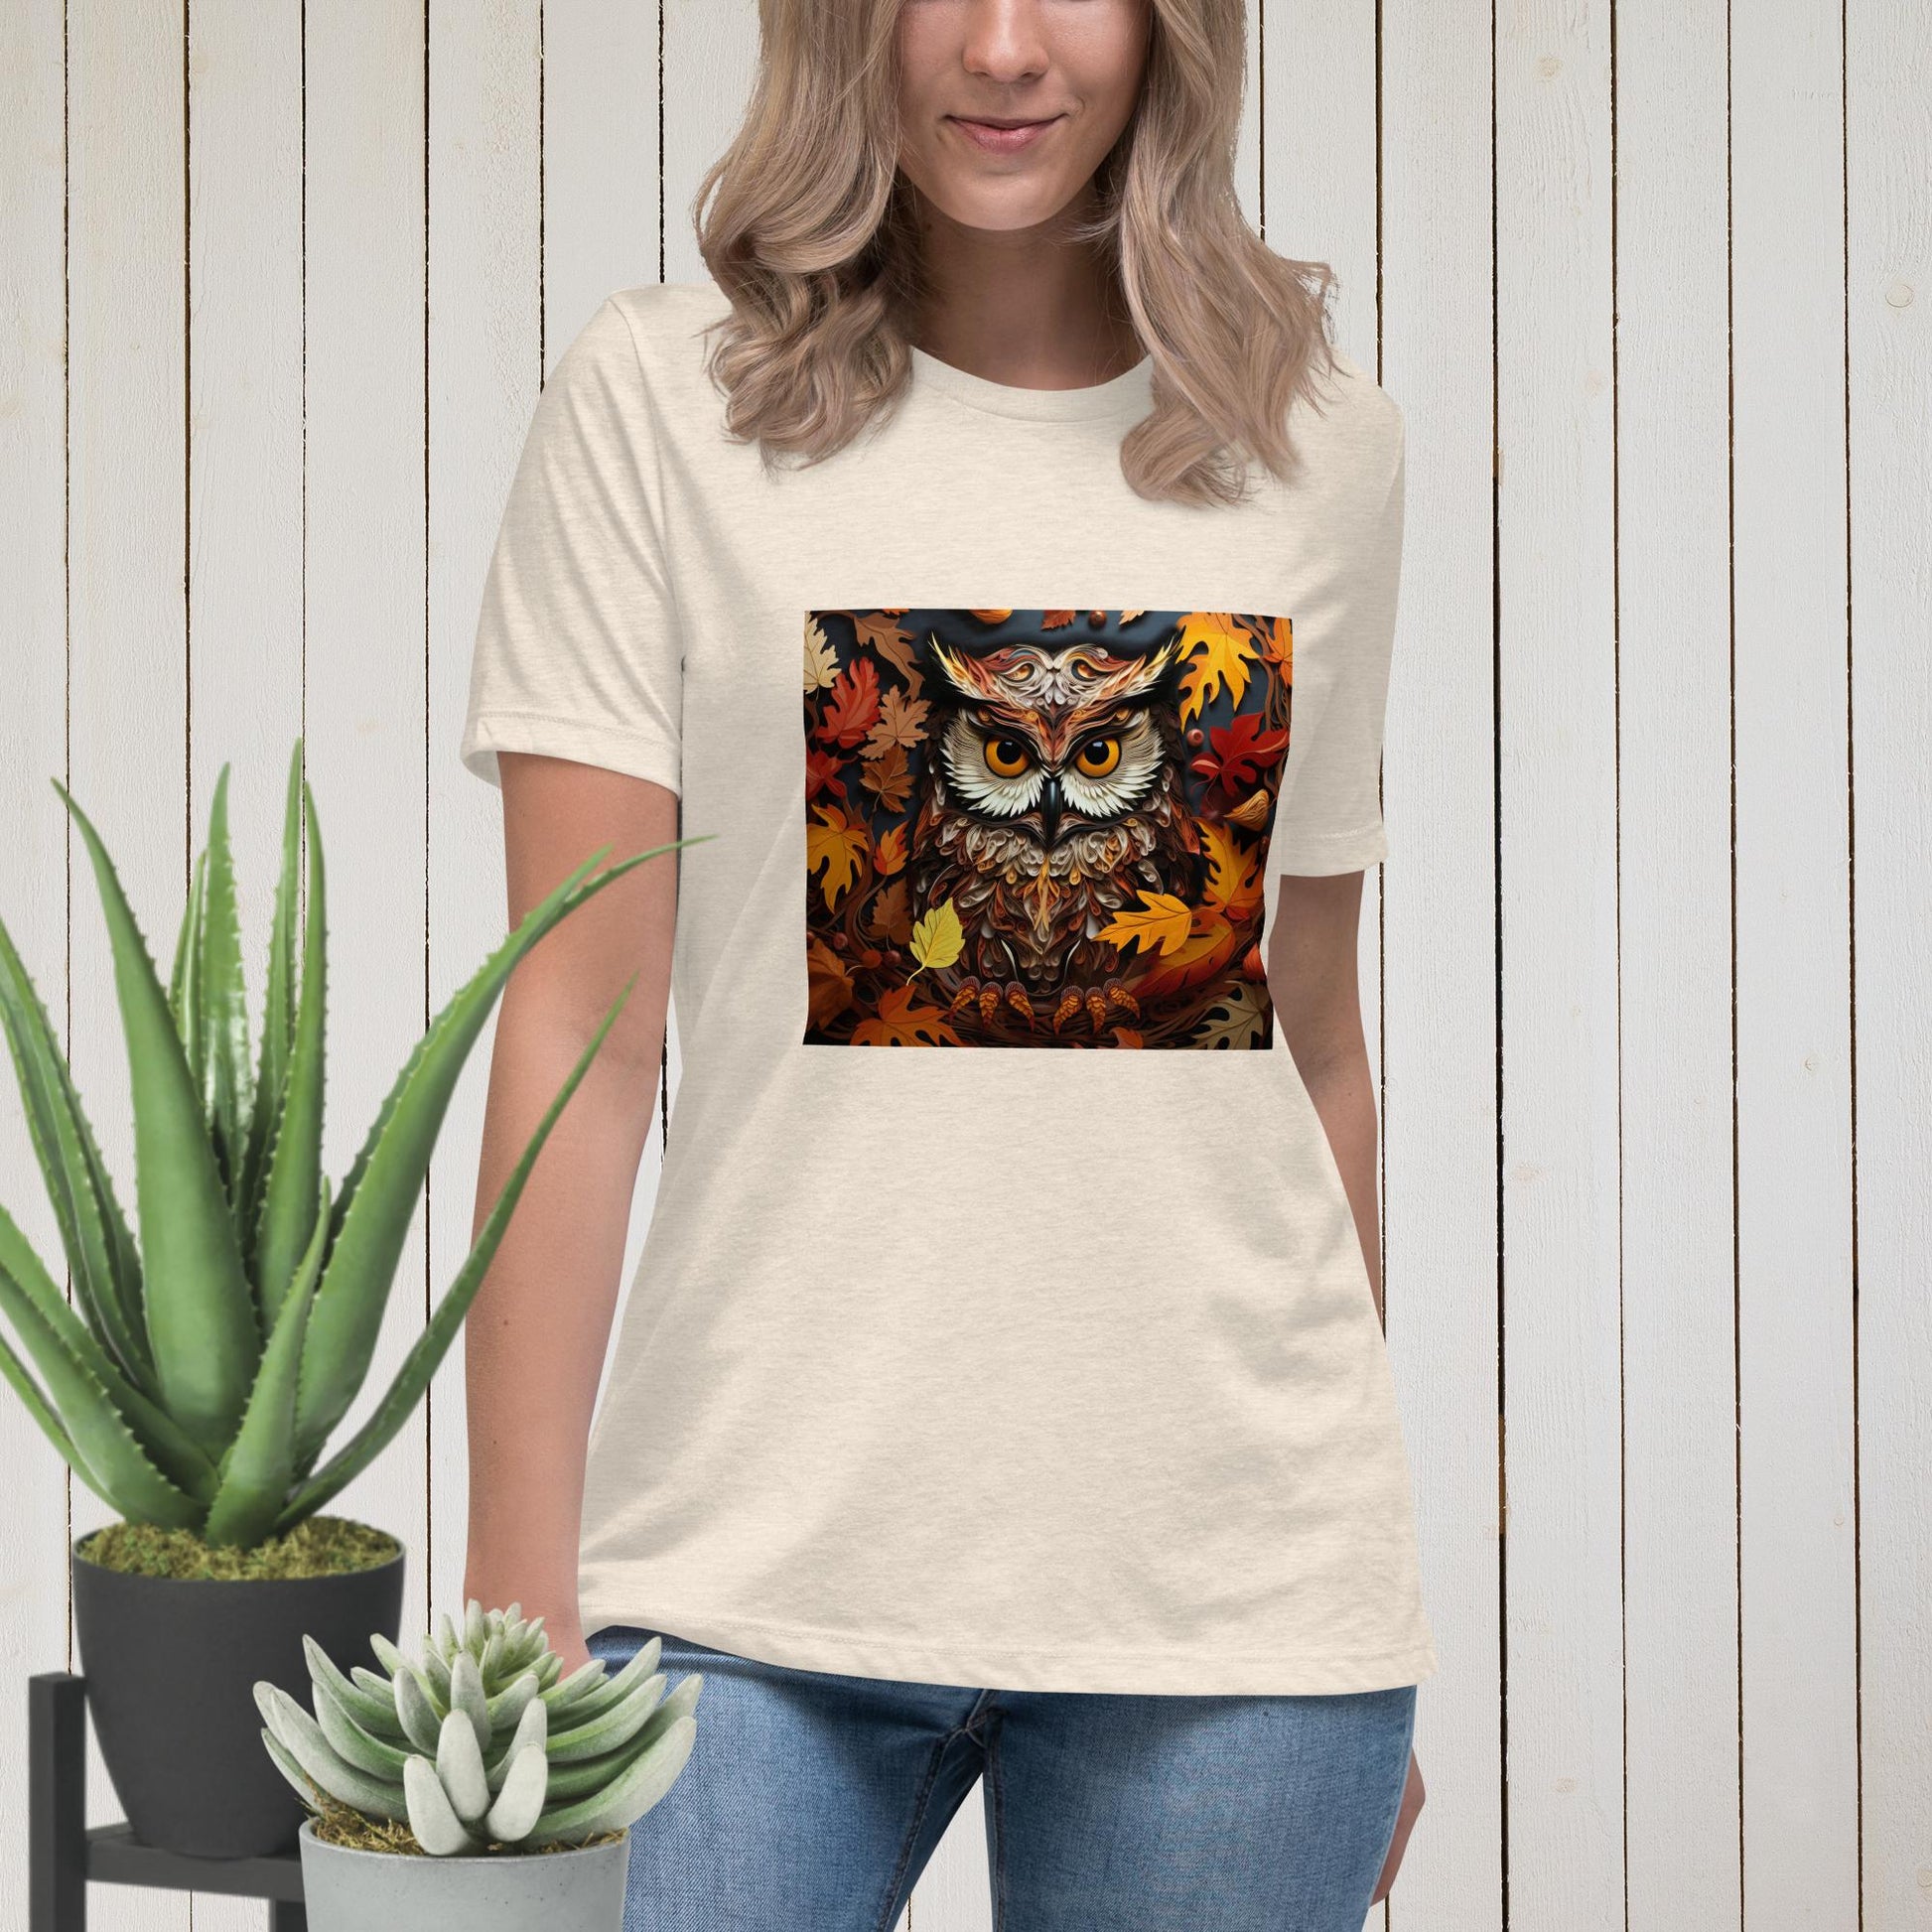 Owl in Fall Women's Relaxed T-Shirt - Legacy Creator IncHeather Prism NaturalS